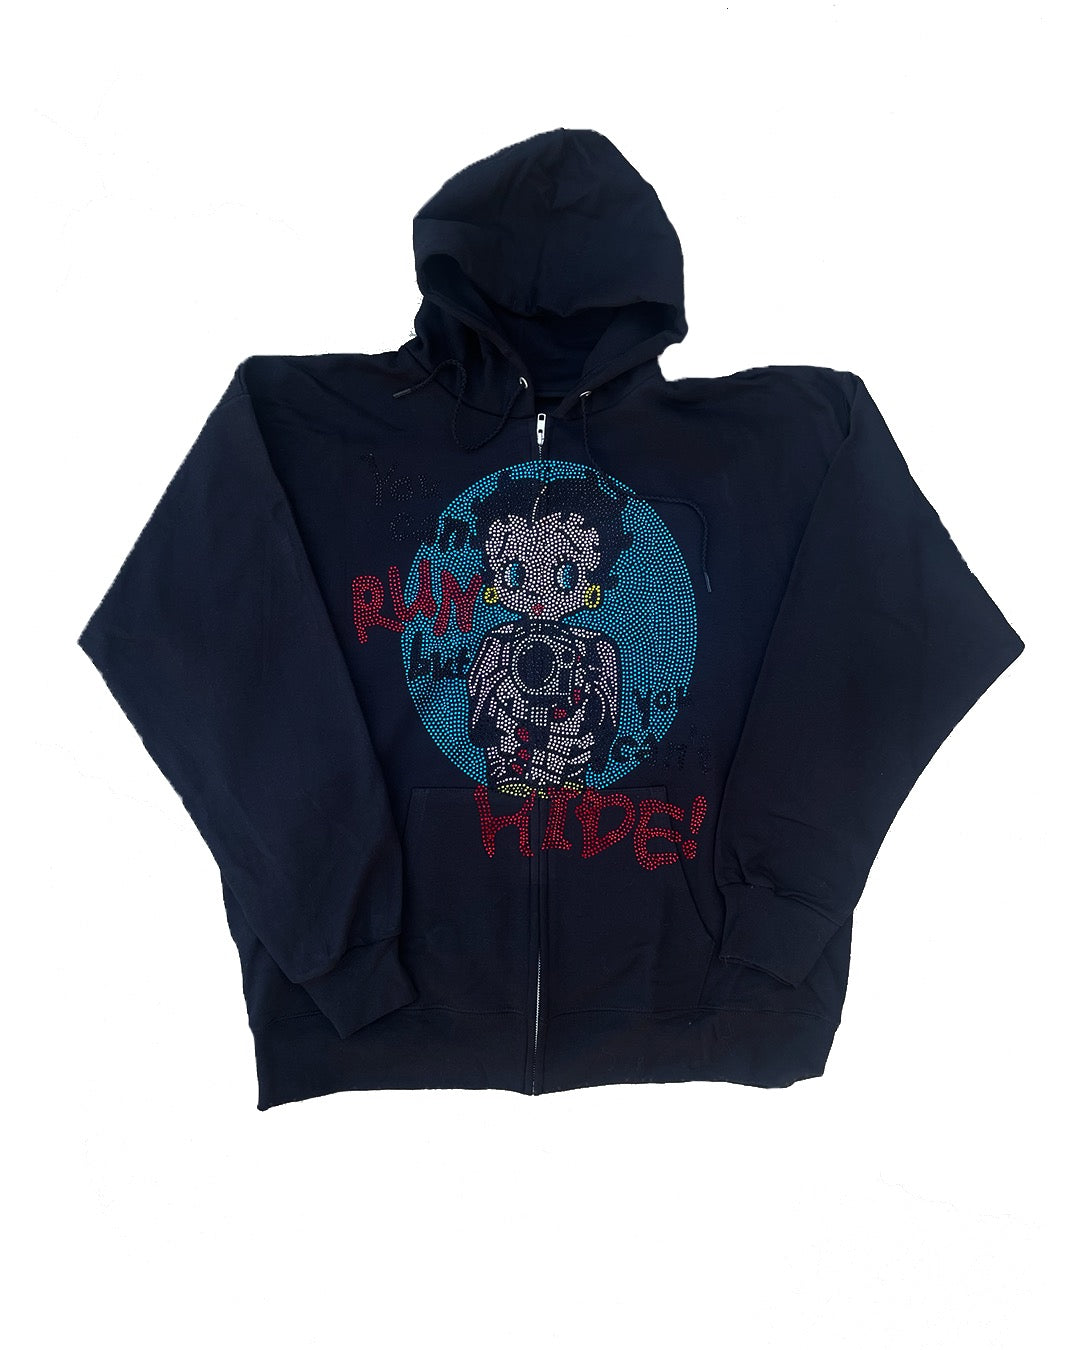 Rhinestone Betty Boop "You Can Run But You Can't Hide" Zip-Up Hoodie